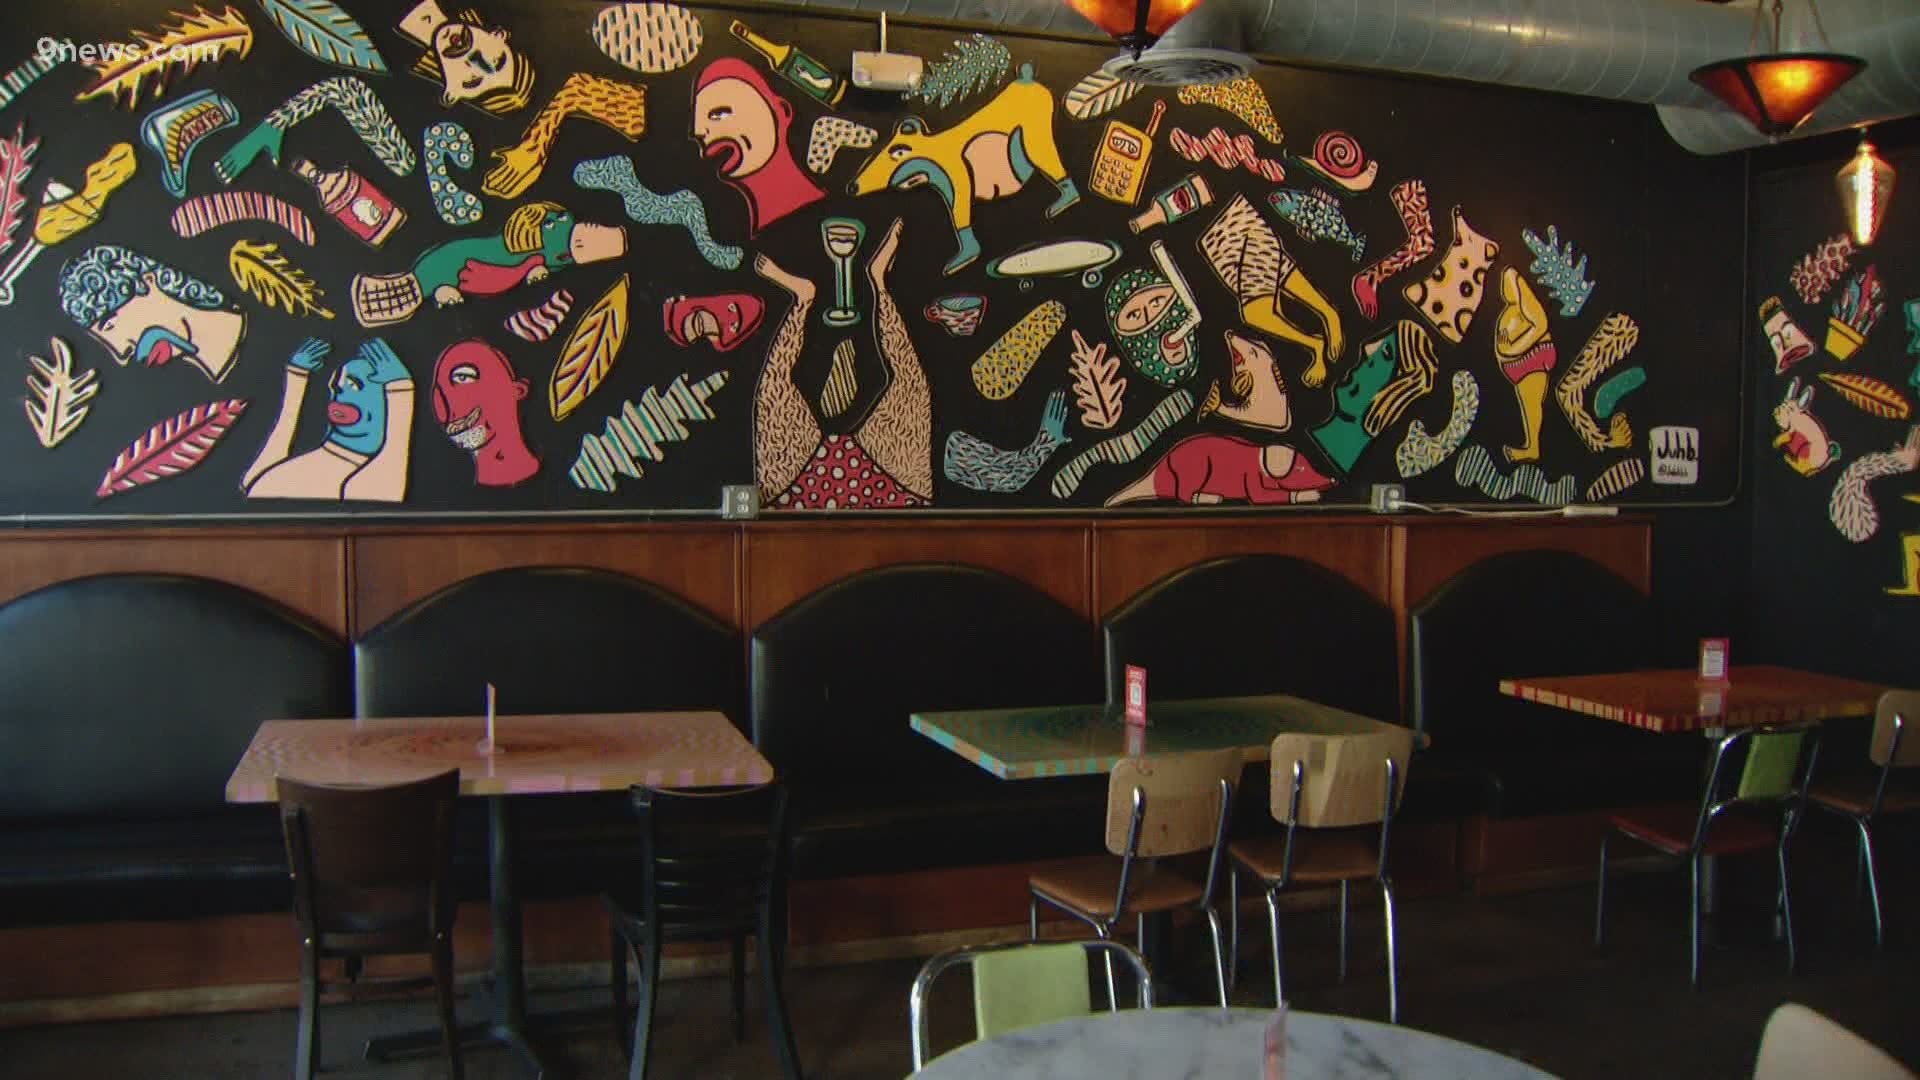 The Capitol Hill restaurant opened in 2007. Co-owner Lauren Roberts says the restaurant's environment is intentionally colorful and reflective of Denver.